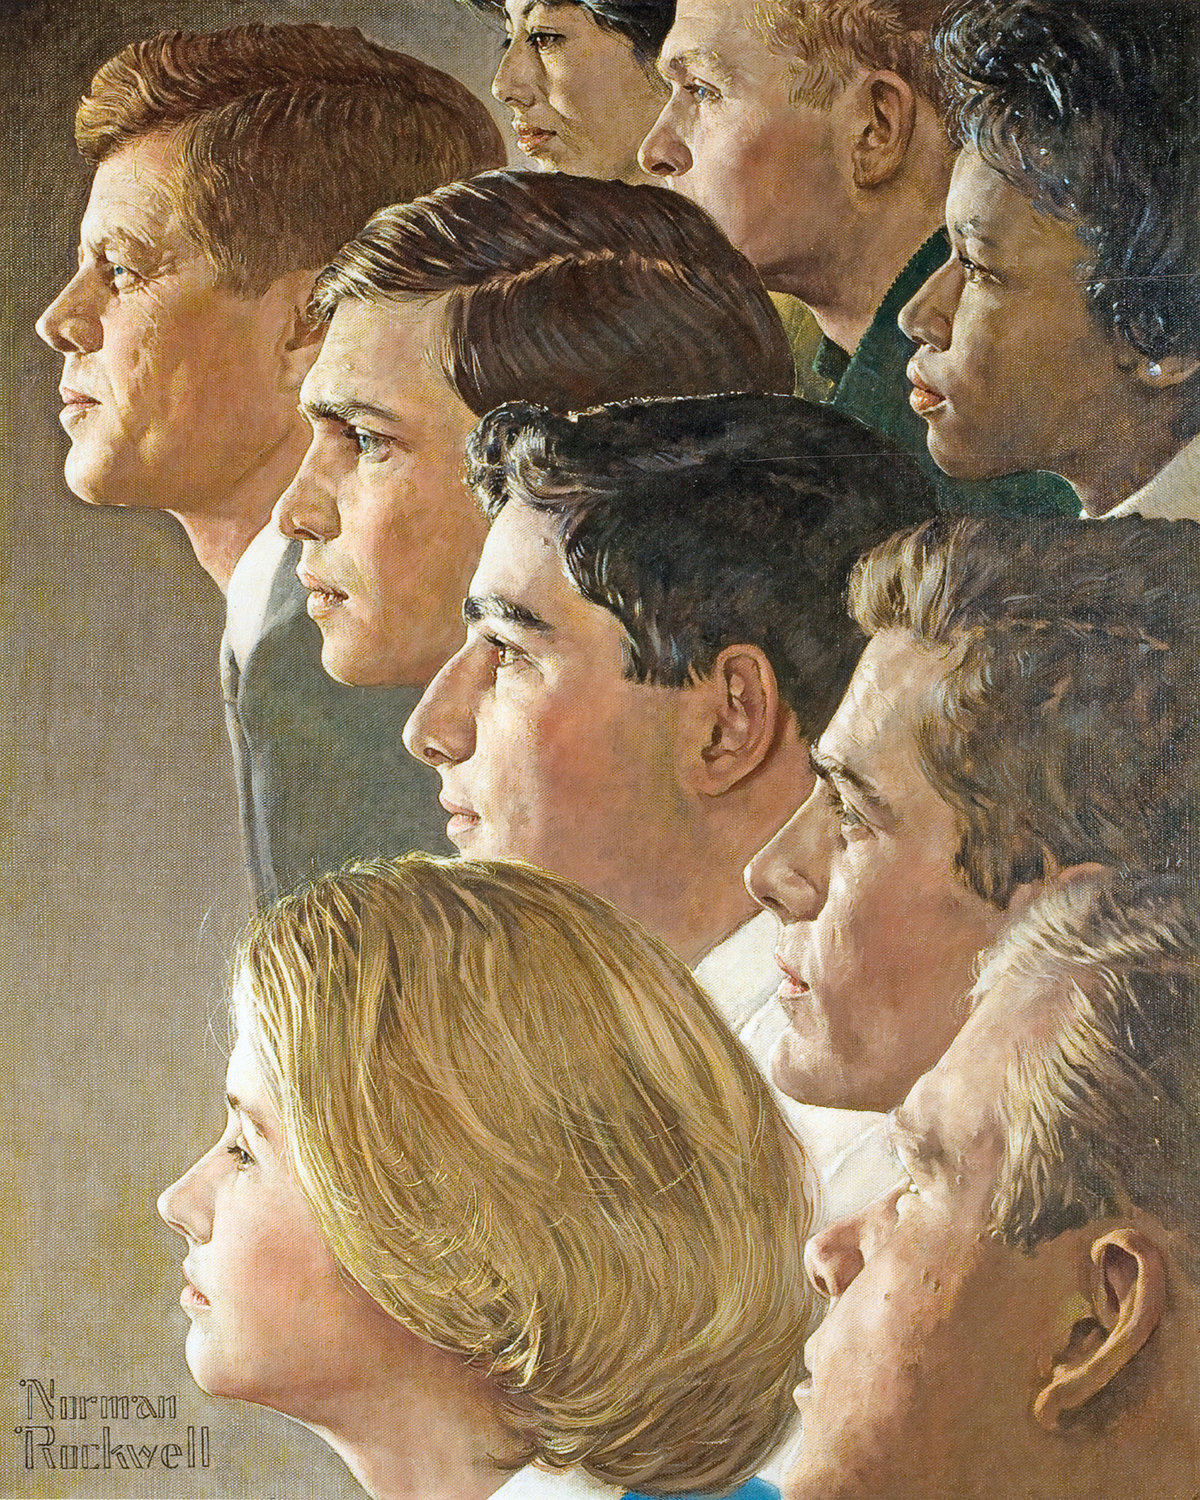 “The Peace Corps: JFK’s Bold Legacy,” 1966, Norman Rockwell, (American, 1894–1978), Norman Rockwell Museum Collection.